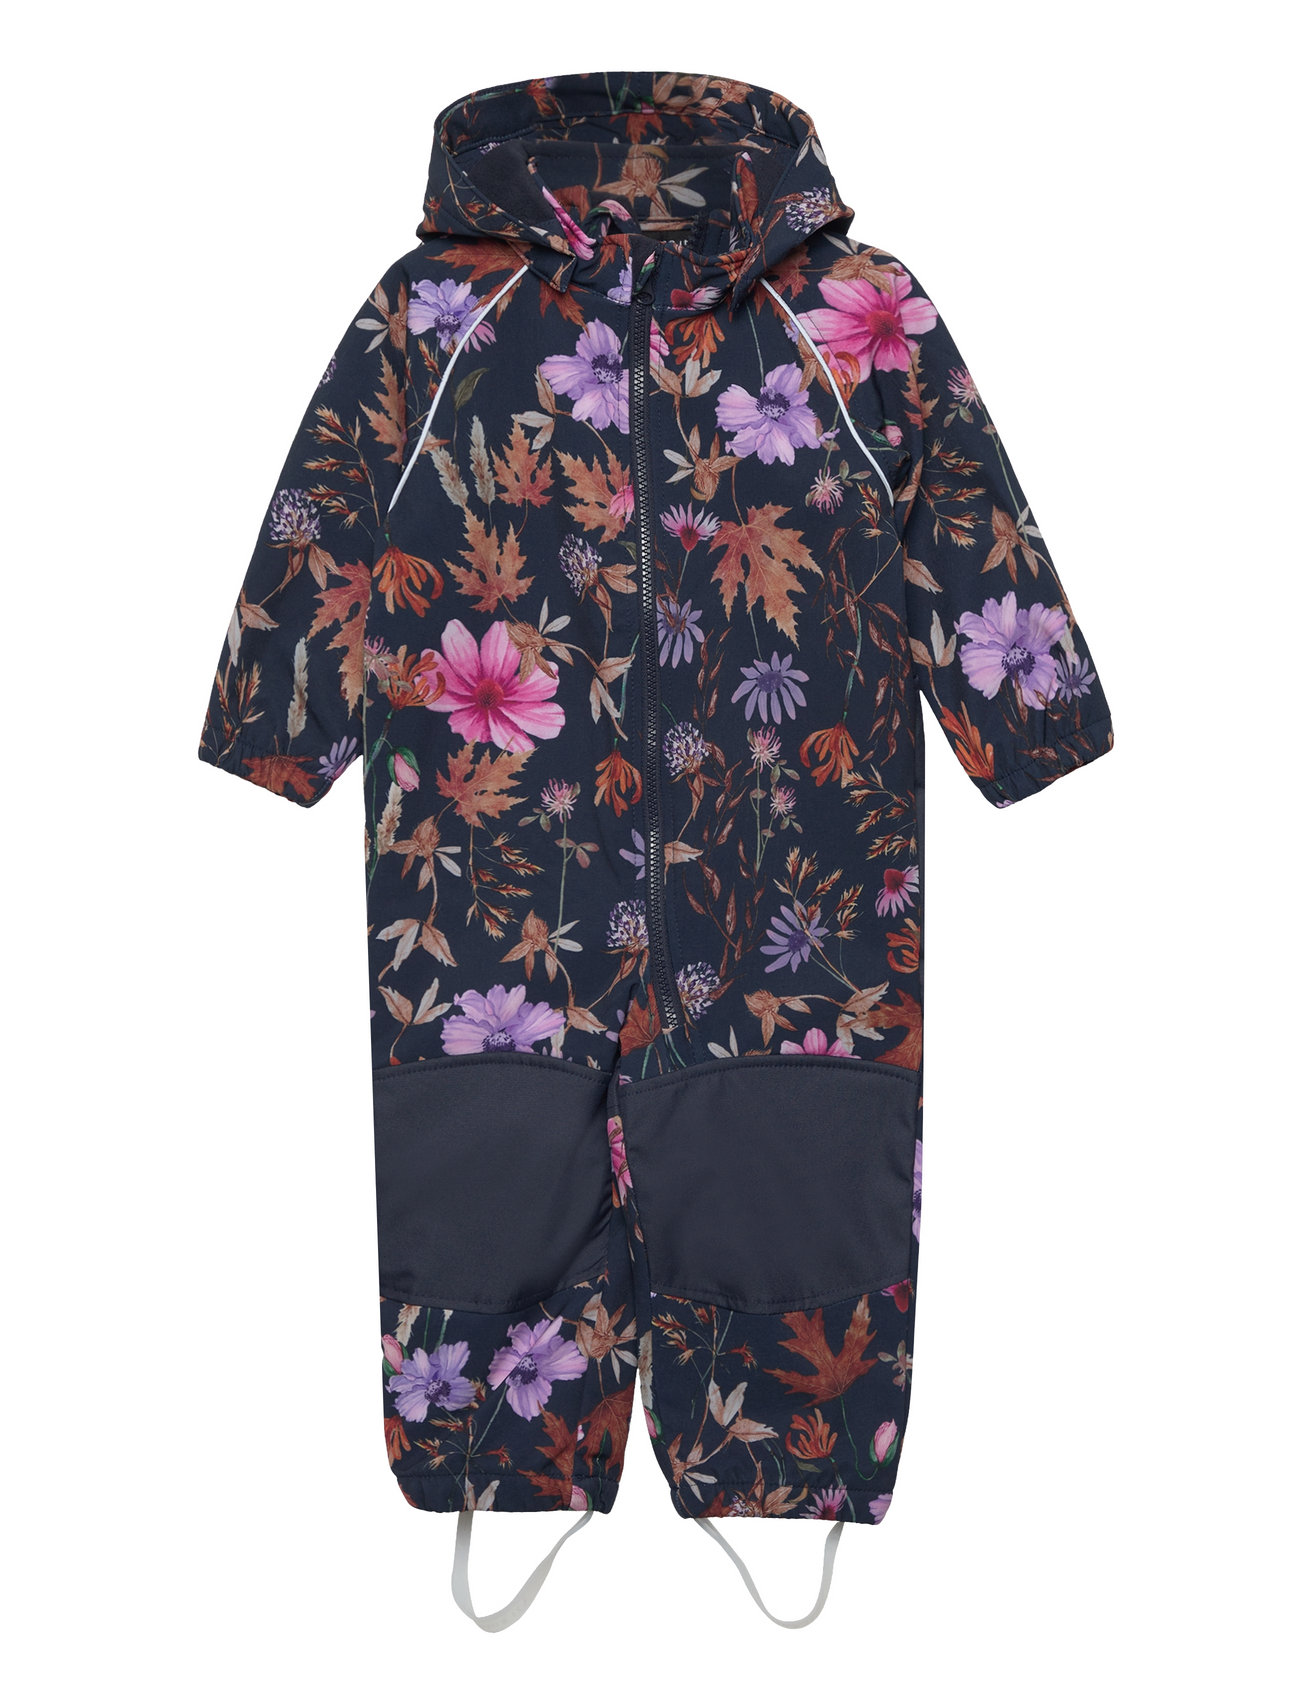 name it Nmfalfa08 €. Buy and name Autumn Flower from Fo at Fast returns it delivery 31.35 Coveralls Suit online easy Noos Boozt.com. 